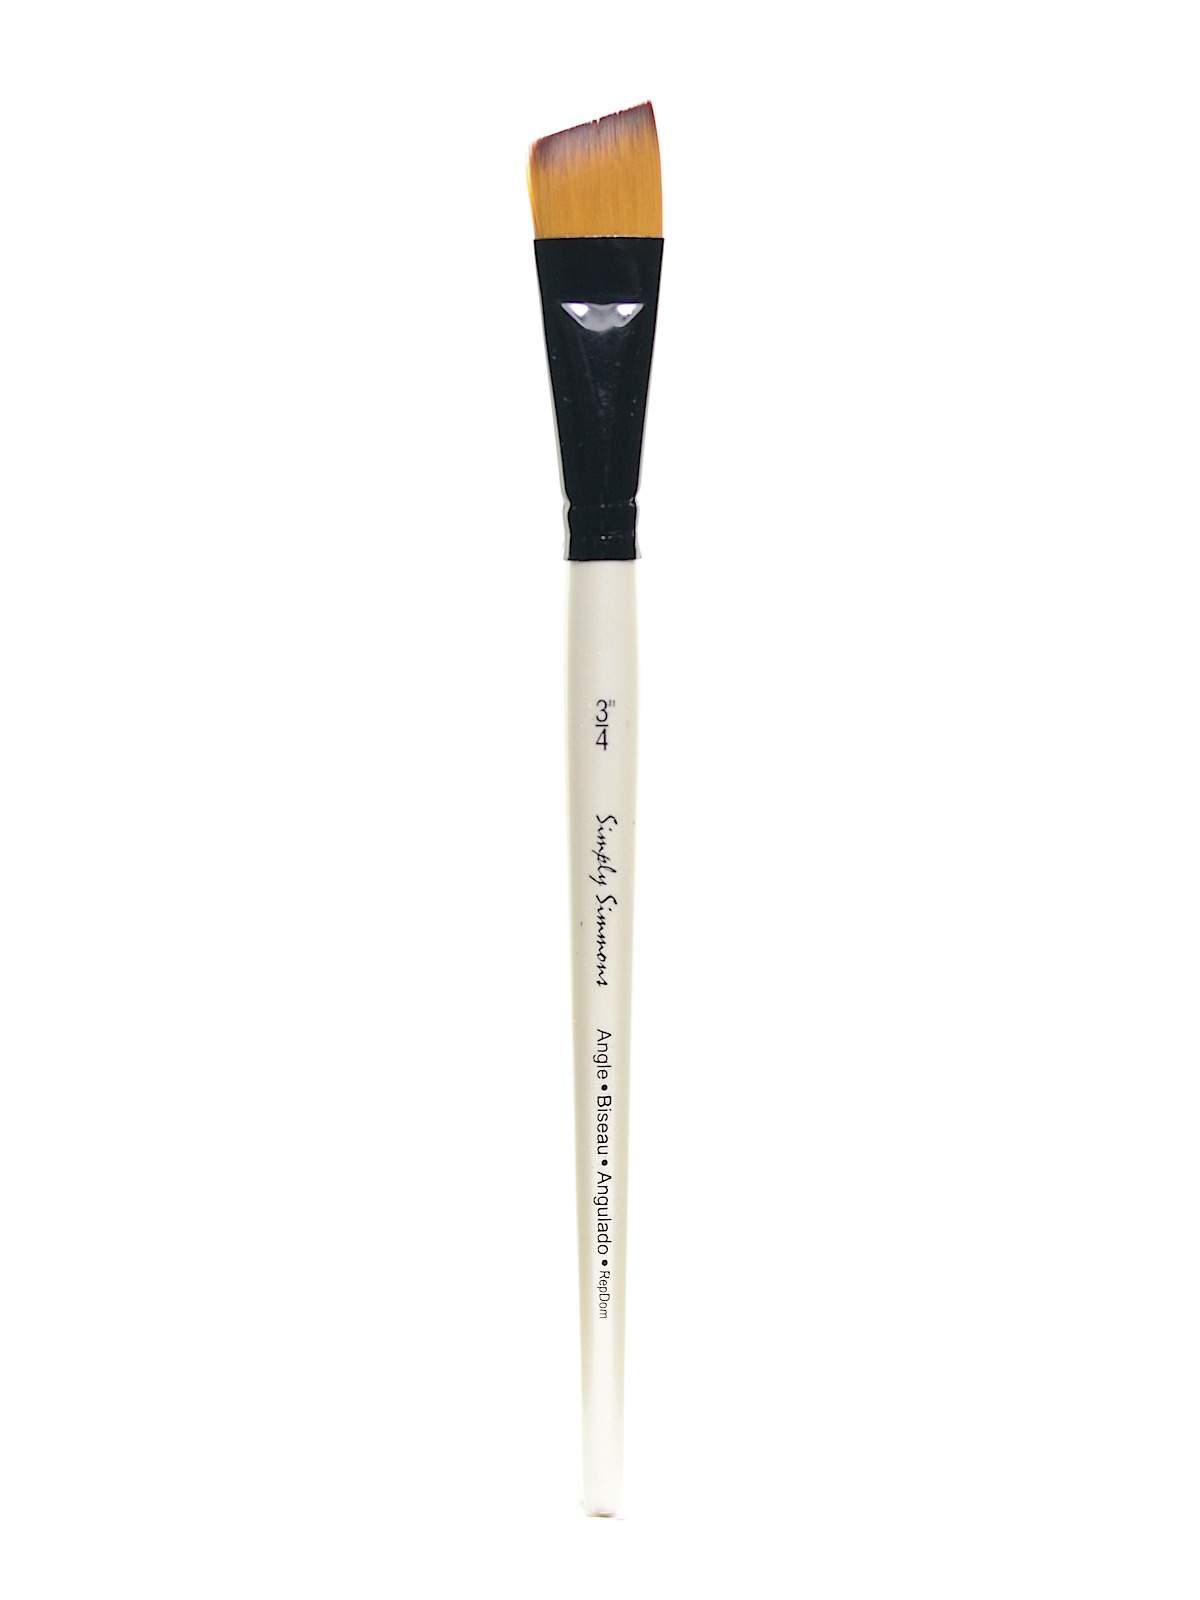 Simply Simmons Short Handle Brushes Angle Shader 3 4 In.